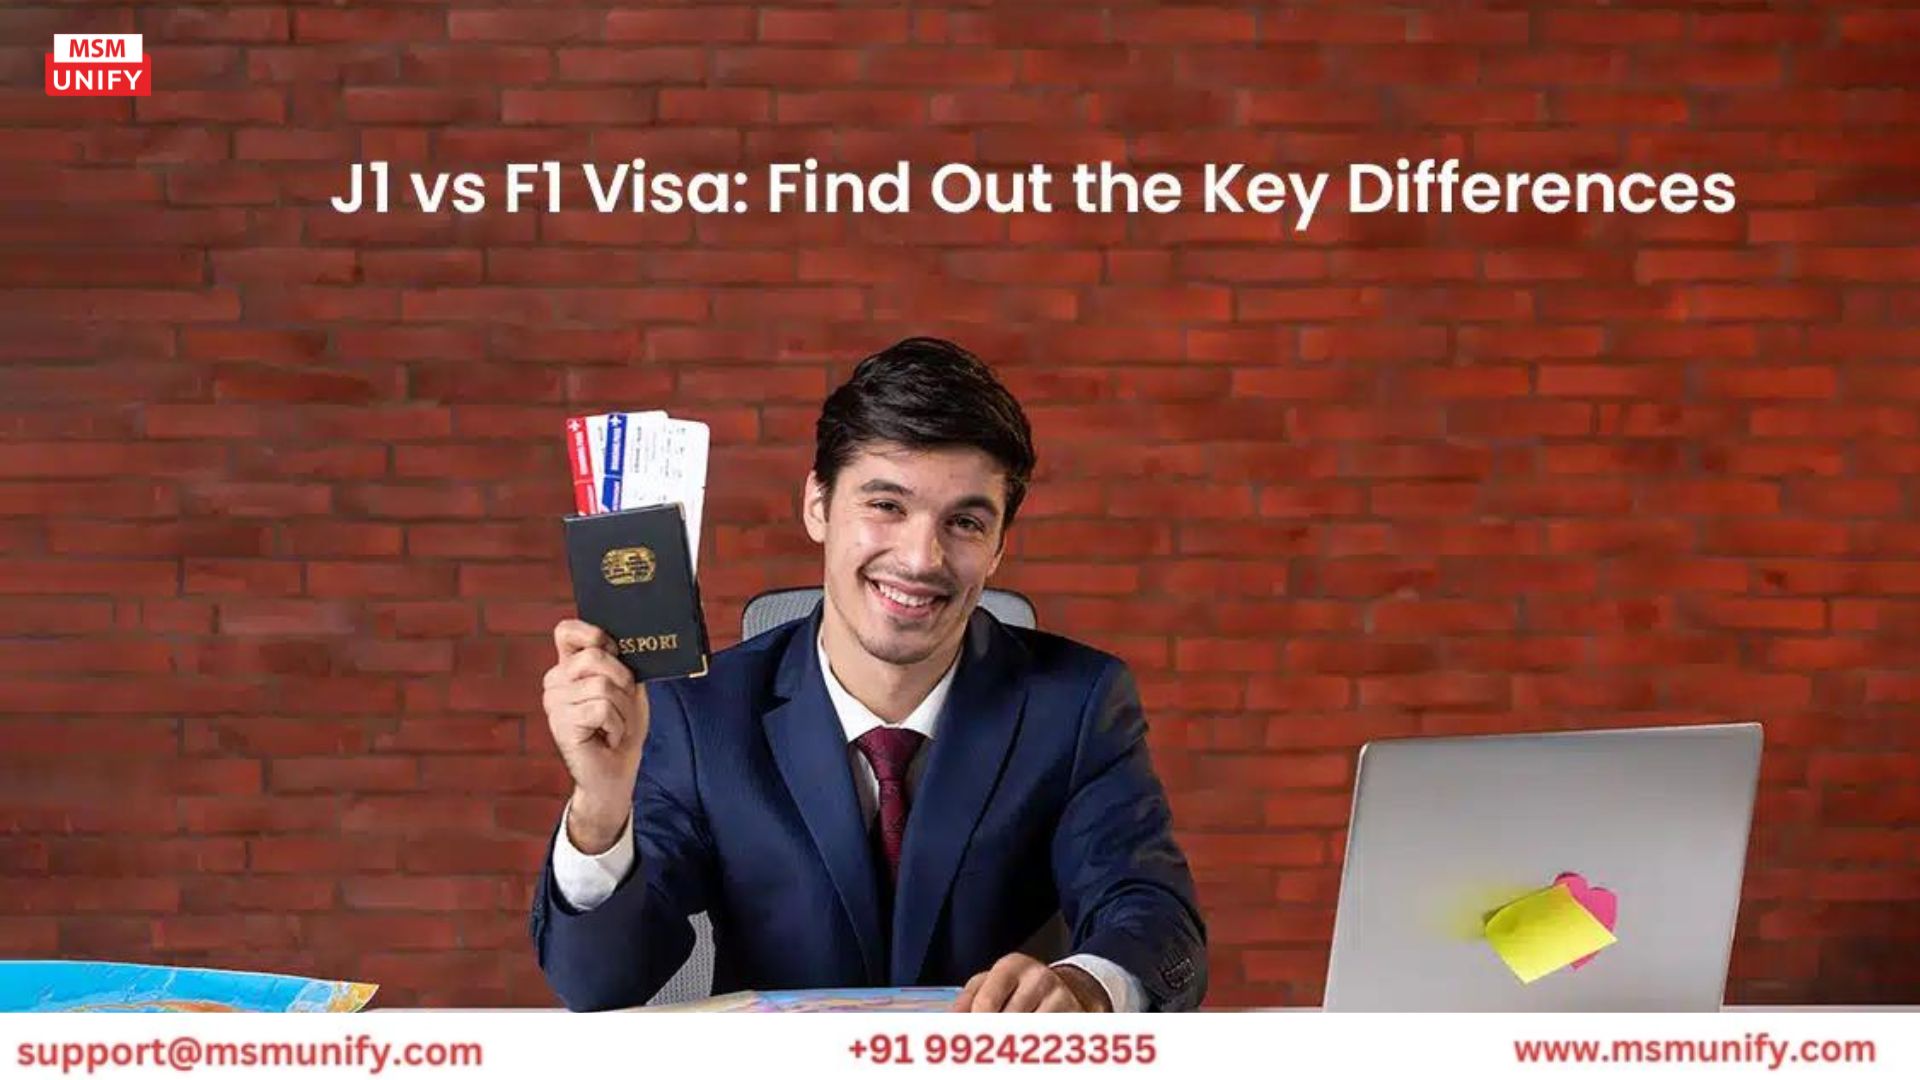 Explore the <a href="https://www.msmunify.com/blogs/f1-vs-j1-visa/">F1 vs J1 Visa</a> dilemma with our comprehensive guide. Maximize your benefits by understanding the key differences. Choose wisely, thrive effortlessly!

